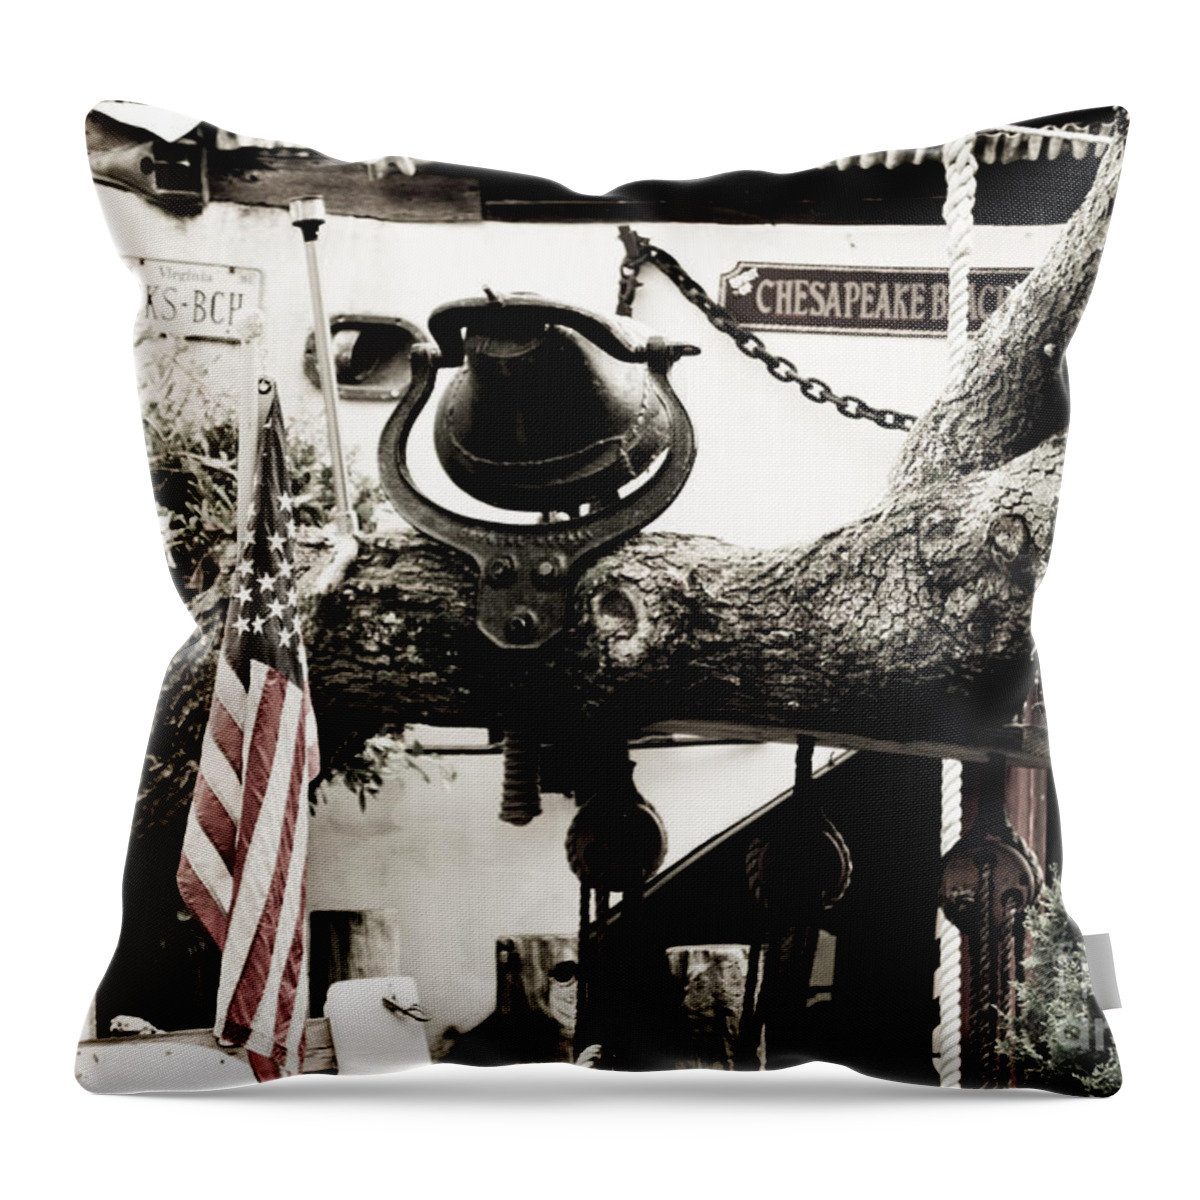 Chick's Beach Throw Pillow featuring the photograph Chick's Beach Marina by Angela DeFrias